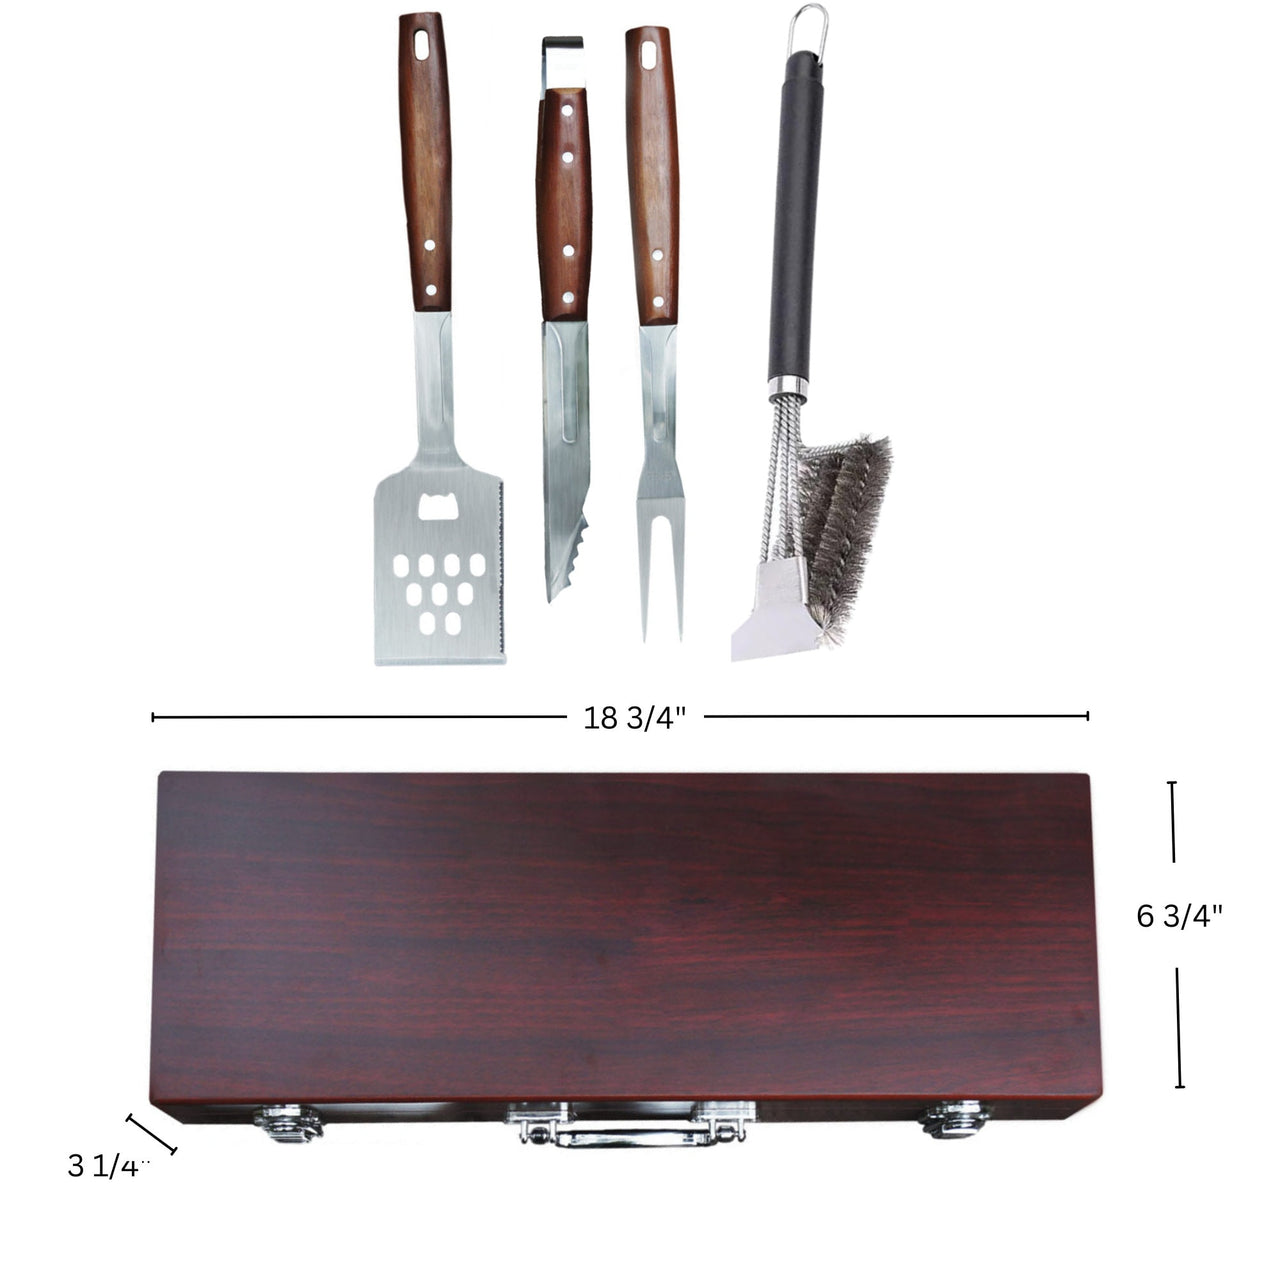 Personalized Grillmaster BBQ Tool Set